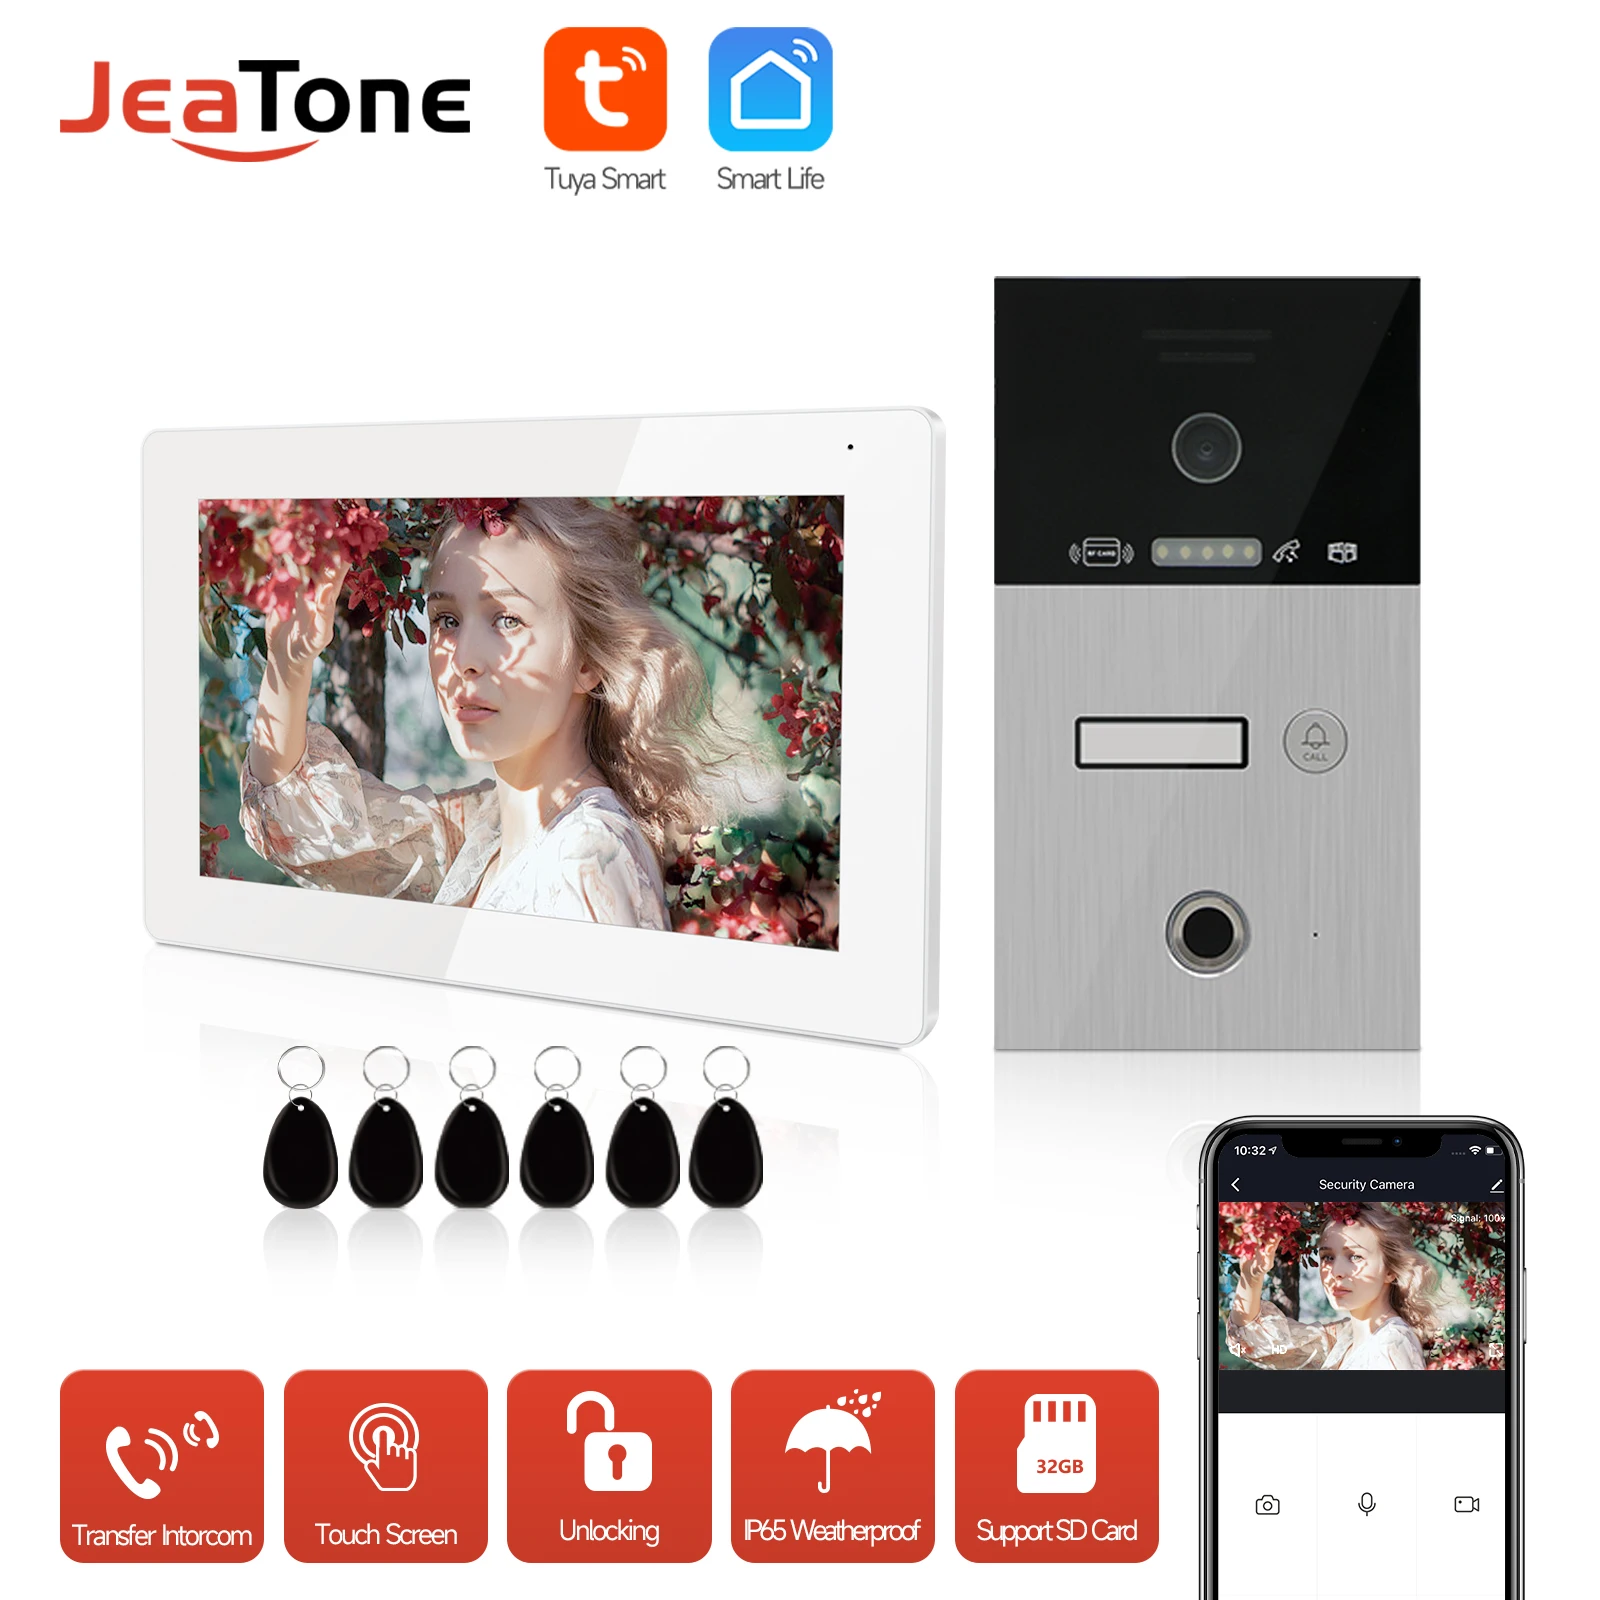 Jeatone TUYA 7” WIFI IP Video Intercom for Home/ in the Apartments 1F/2F/3F Security Protection Doorbell Fingerprint RFIC Coder enlarge